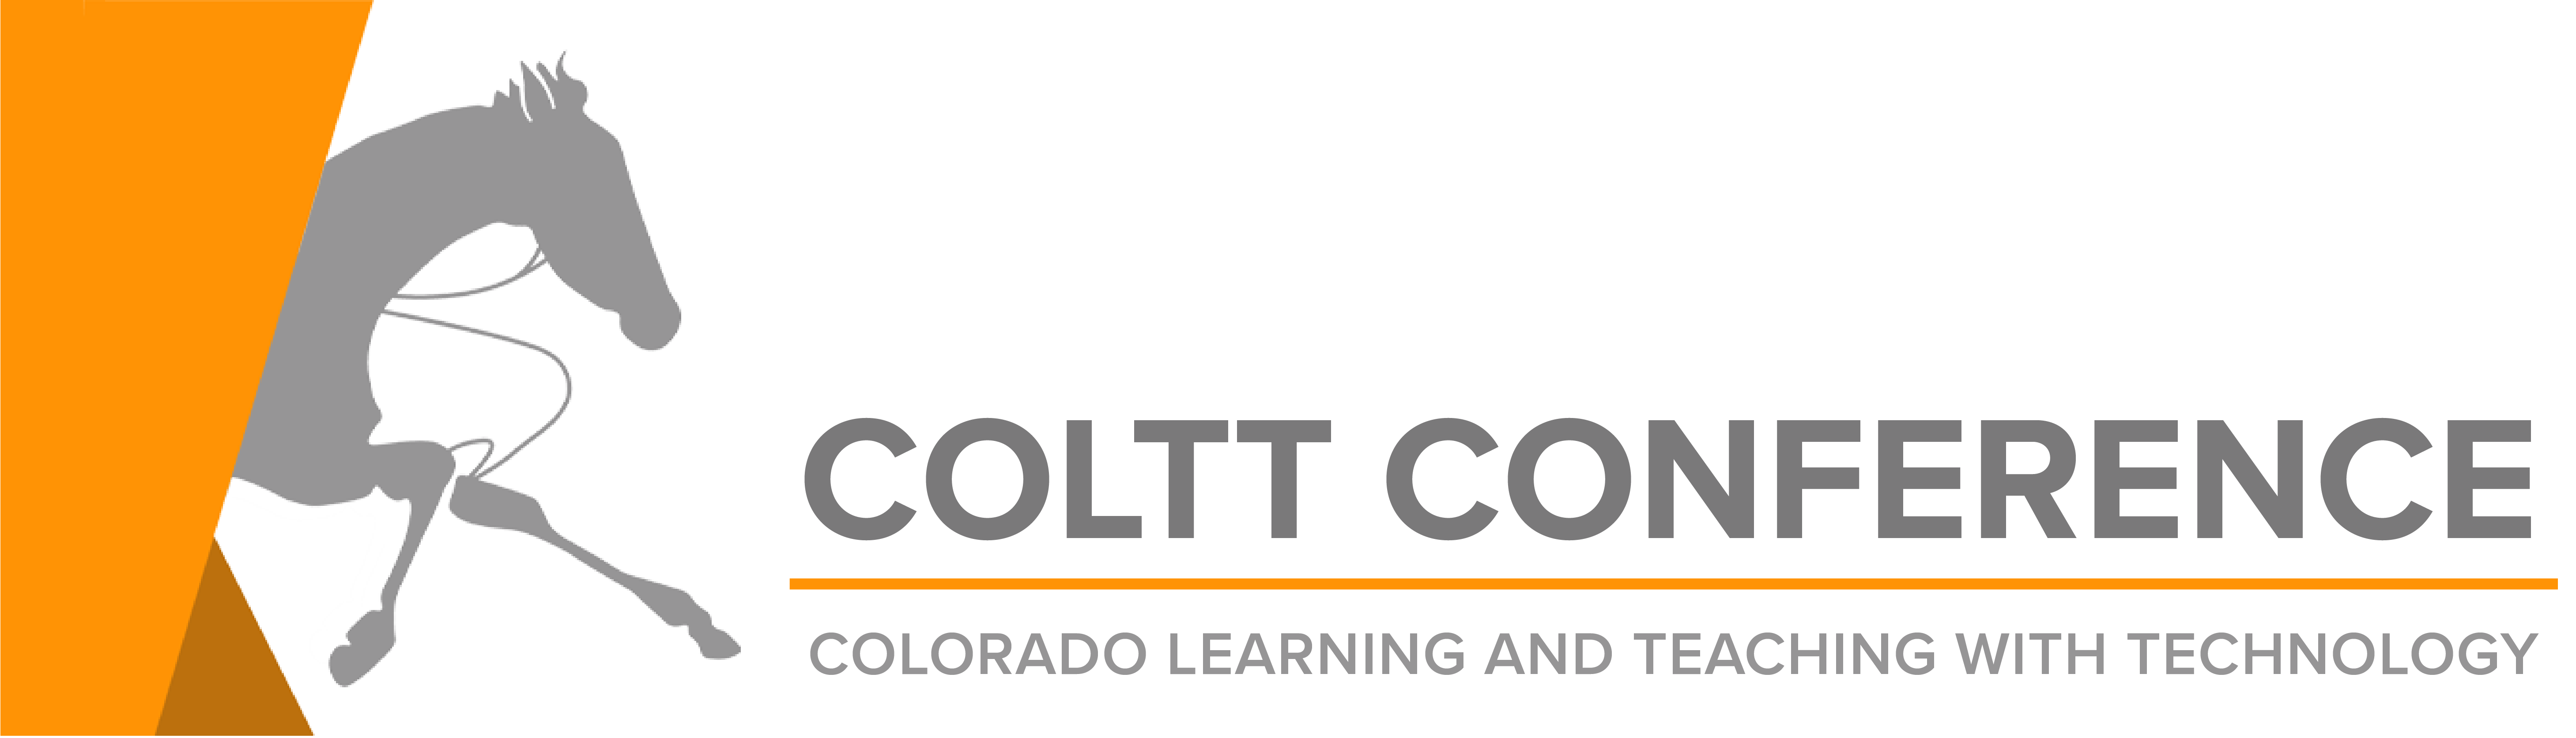 COLTT Conference, Colorado Learning and Teaching with Technology